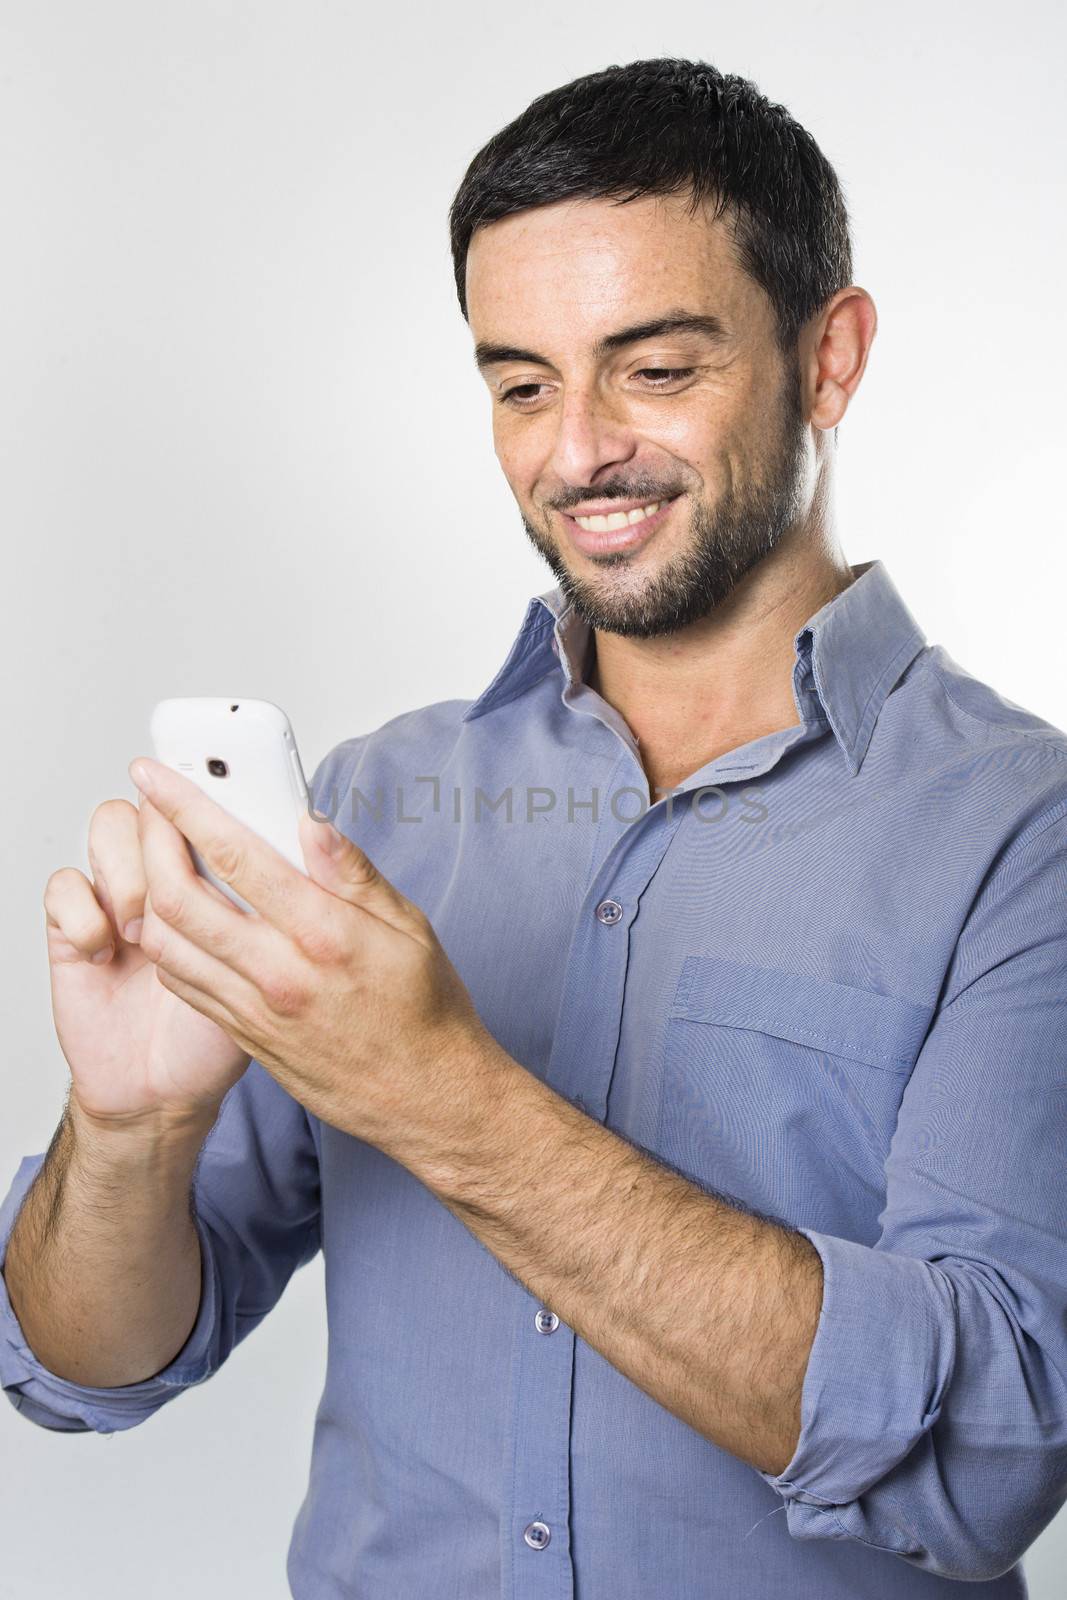 Happy Young Man with Beard texting on Cellphone isolated on White Background